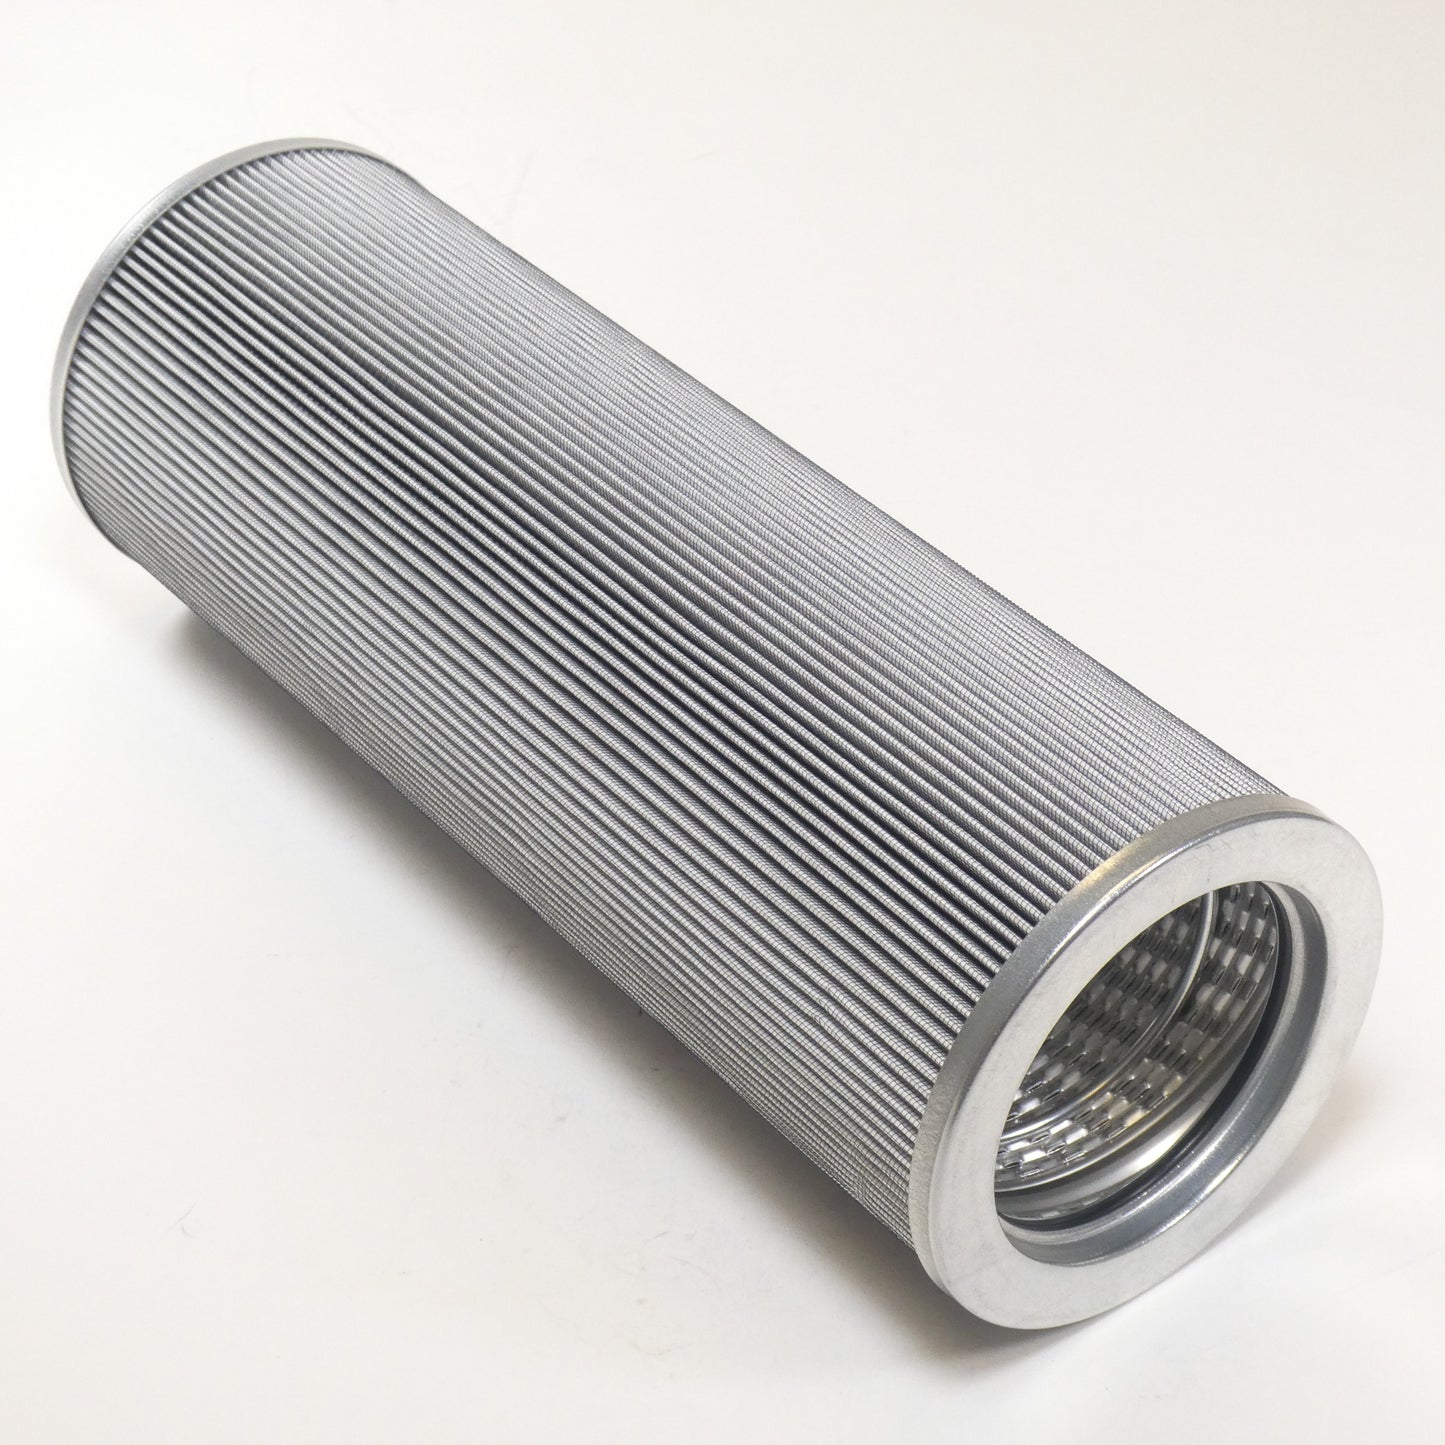 Hydrafil Replacement Filter Element for Diagnetics LPG516B12